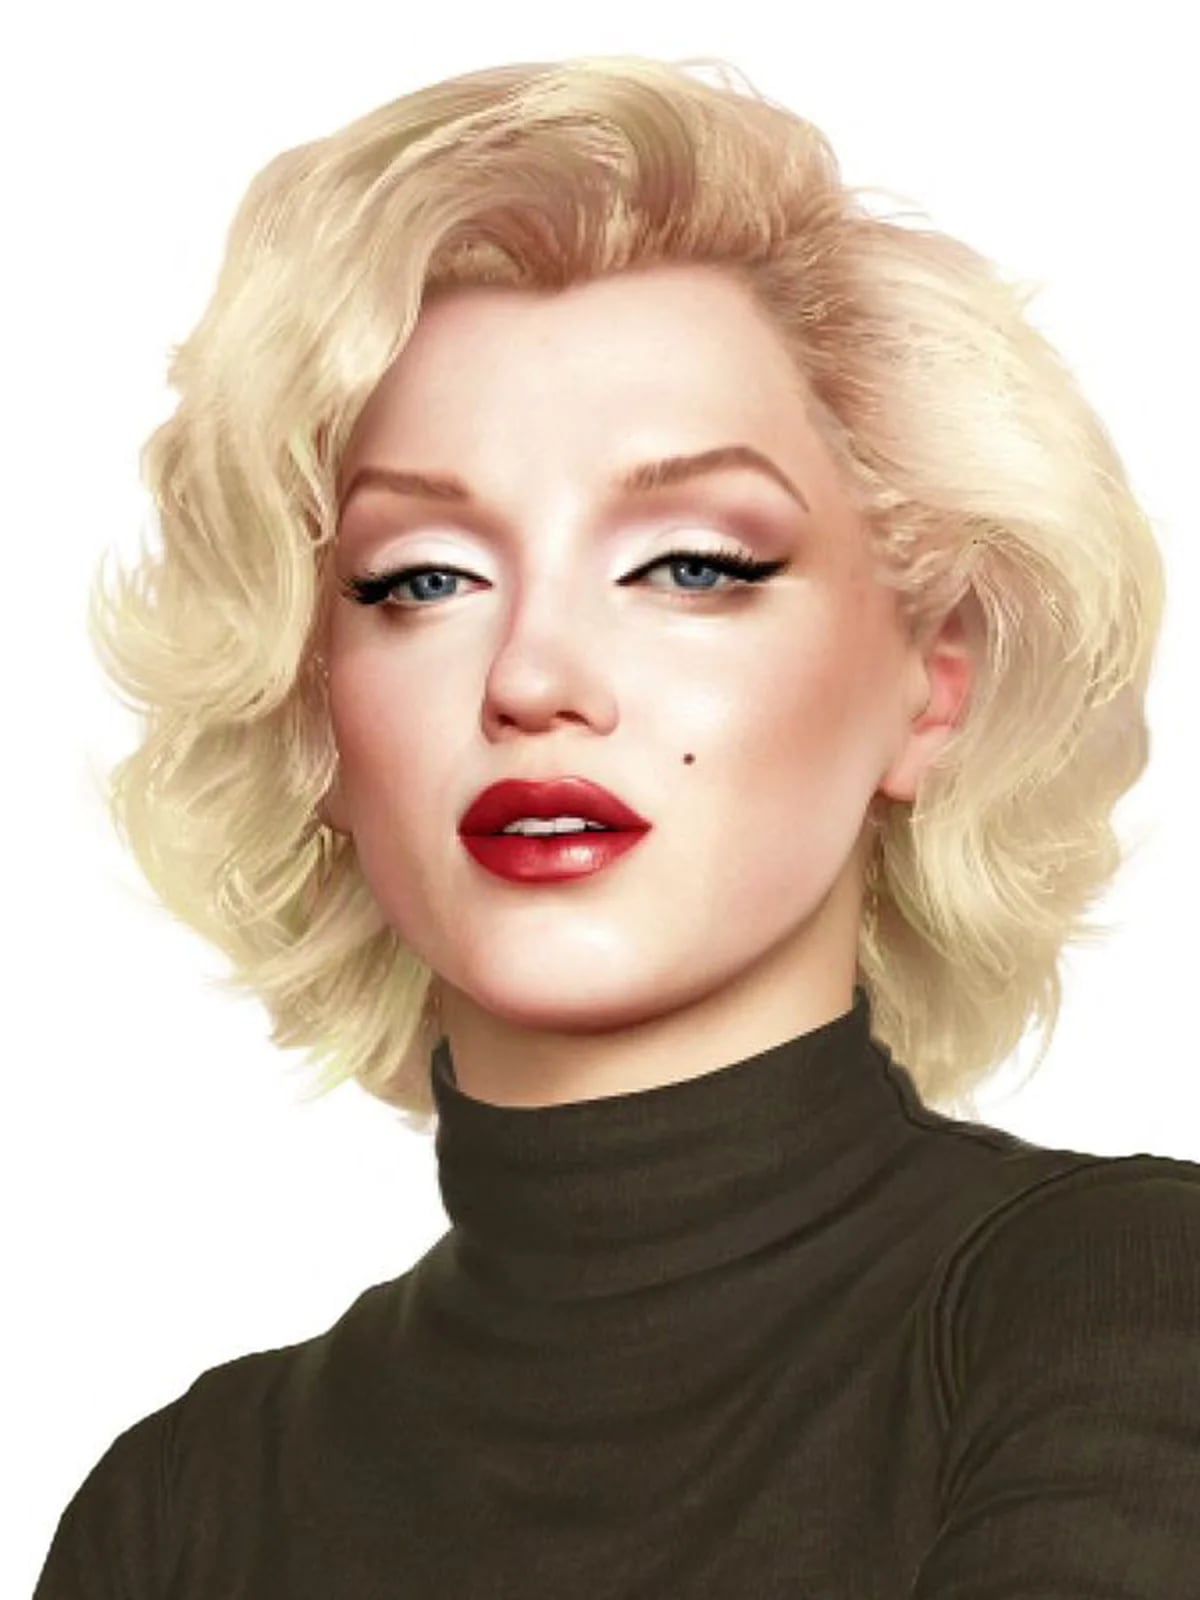 Actresses such as Marilyn Monroe were also digitized